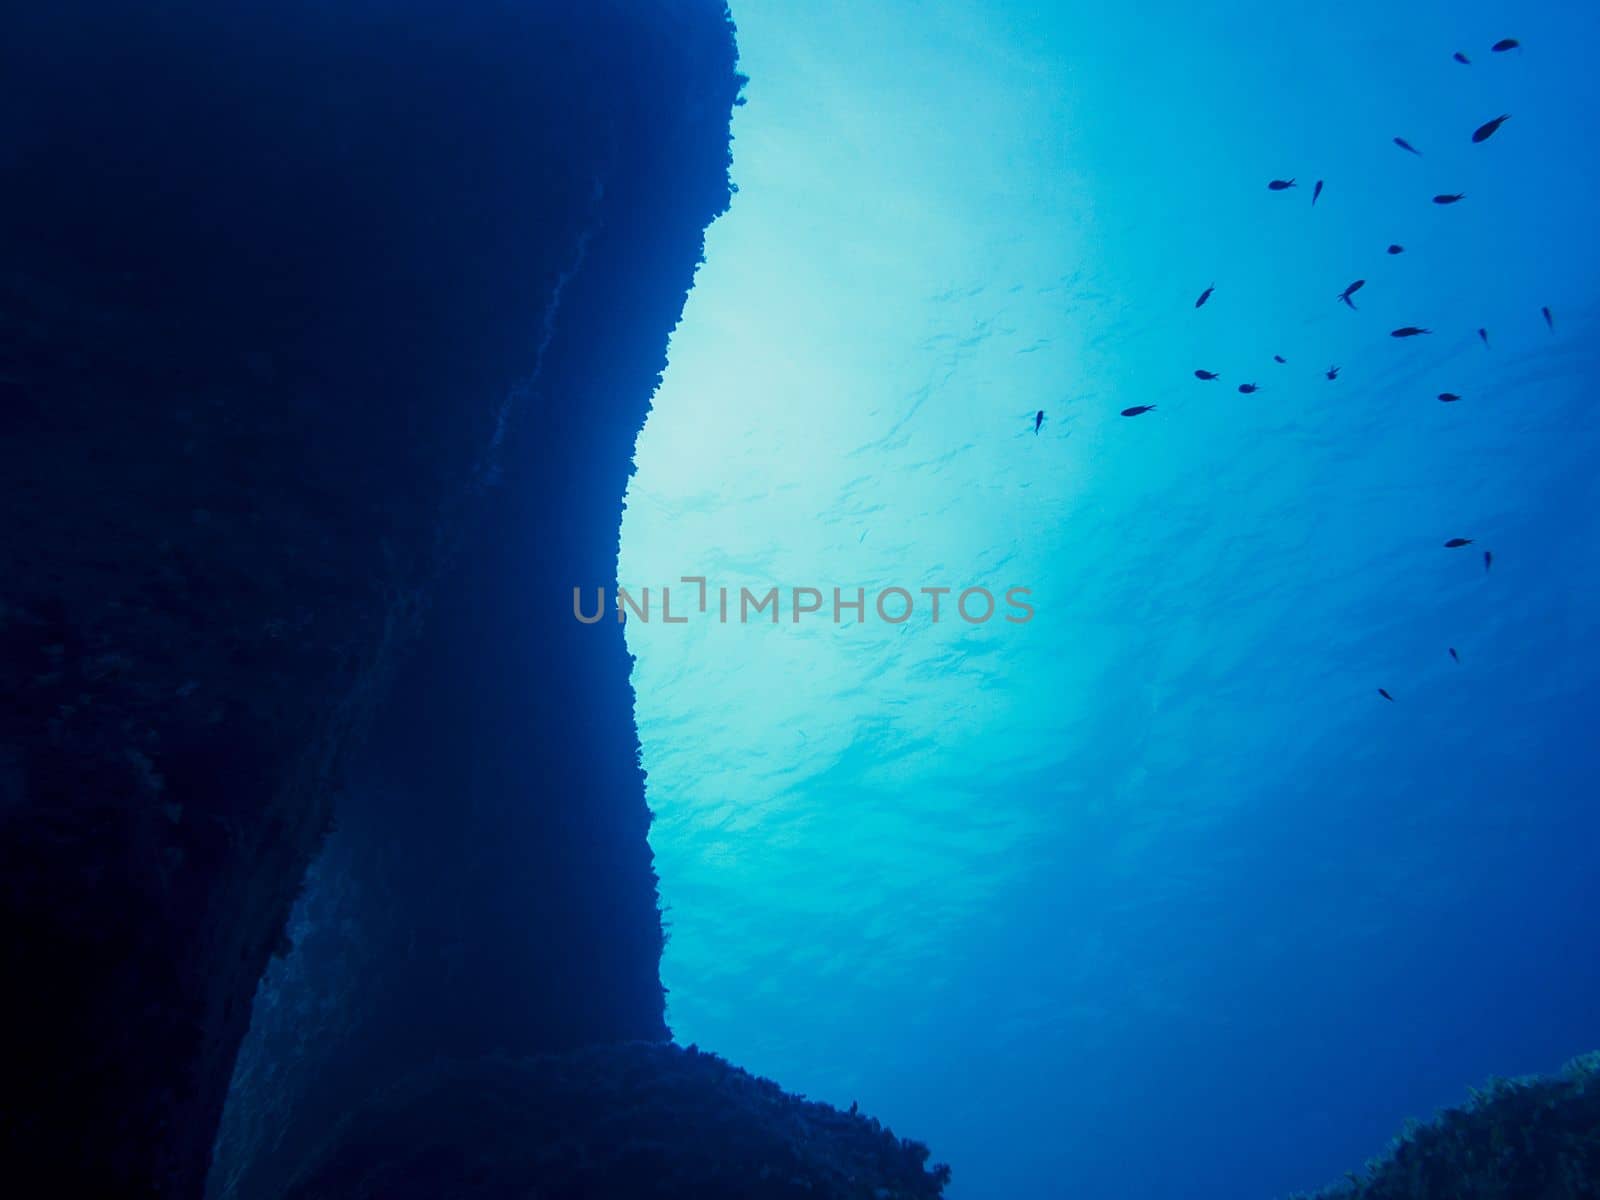 seabed with a large rock wall, small fish swim in the blue and turquoise water, sunlight reflects off the calm surface of the sea